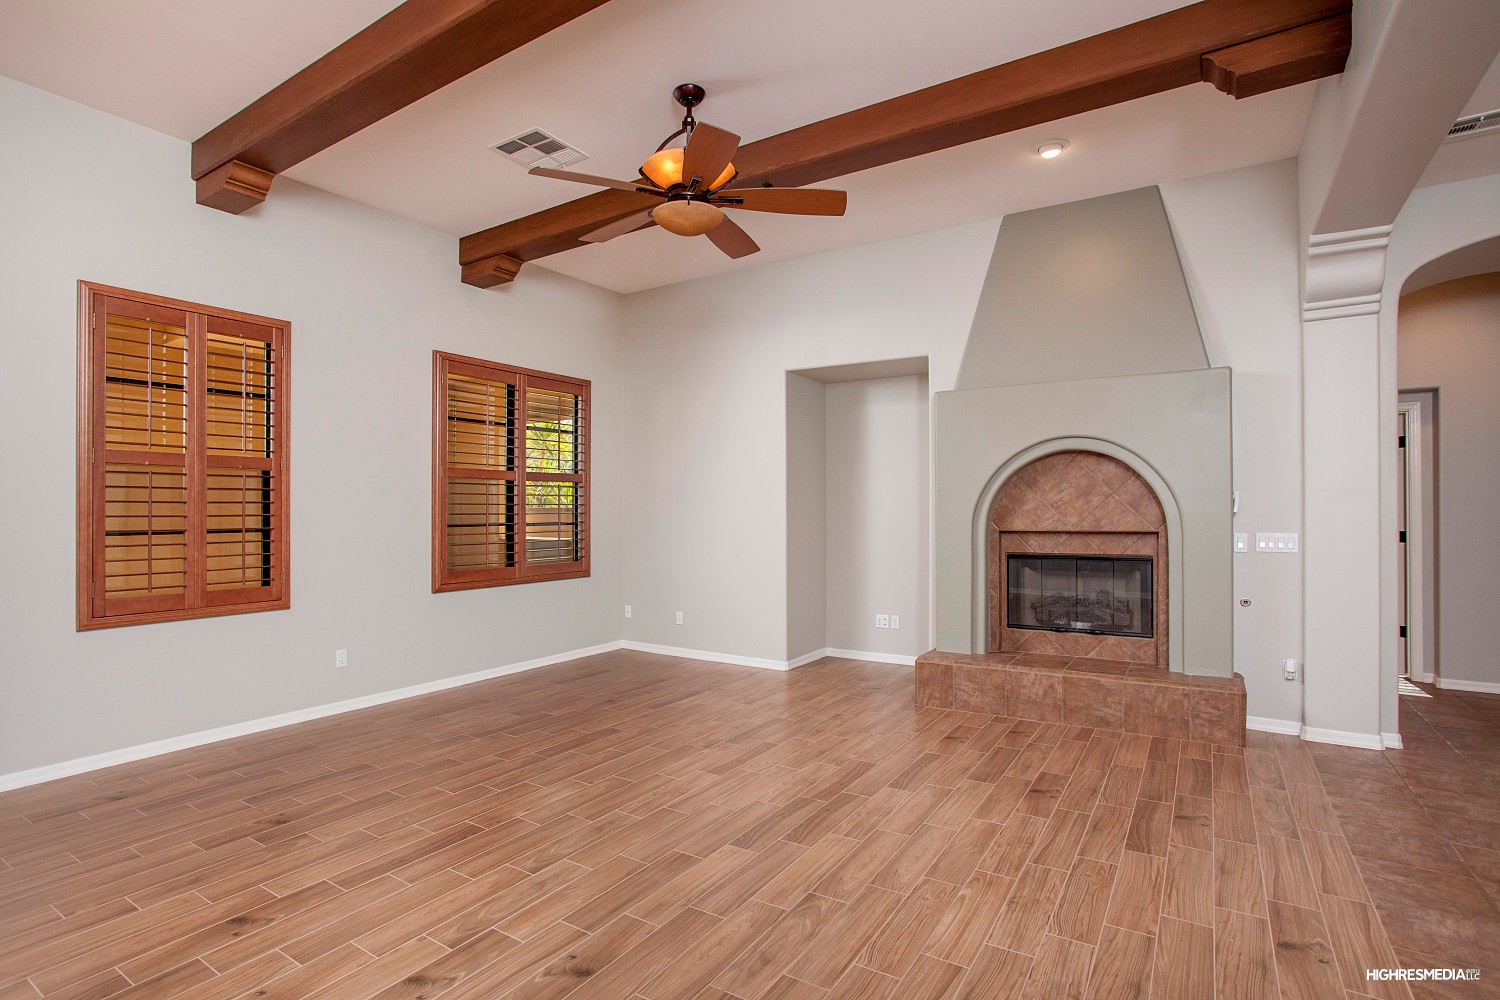 Gas fireplace in great room at this Scottsdale townhome for sale in Market Street at DC Ranch located at 20704 N 90th Pl #1005 Scottsdale, AZ 85255 listed by Don Matheson at The Matheson Team